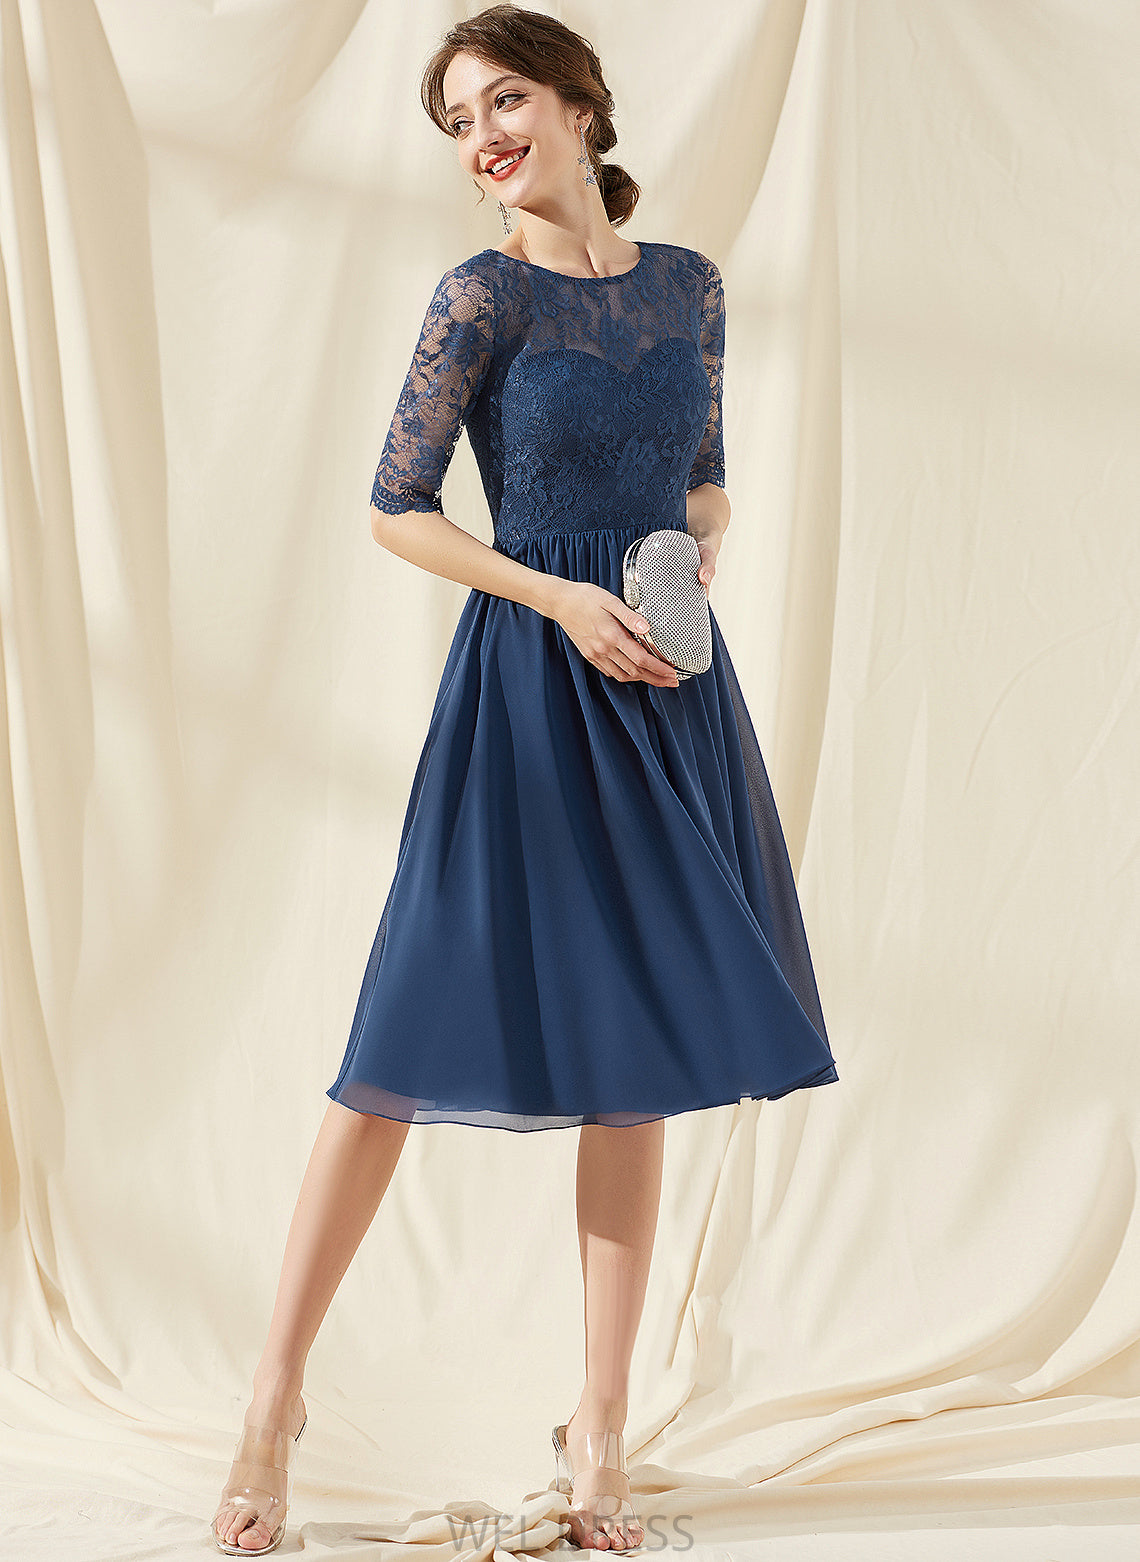 With Scoop Alayna Neck Ruffle Homecoming Dresses A-Line Lace Knee-Length Chiffon Dress Homecoming